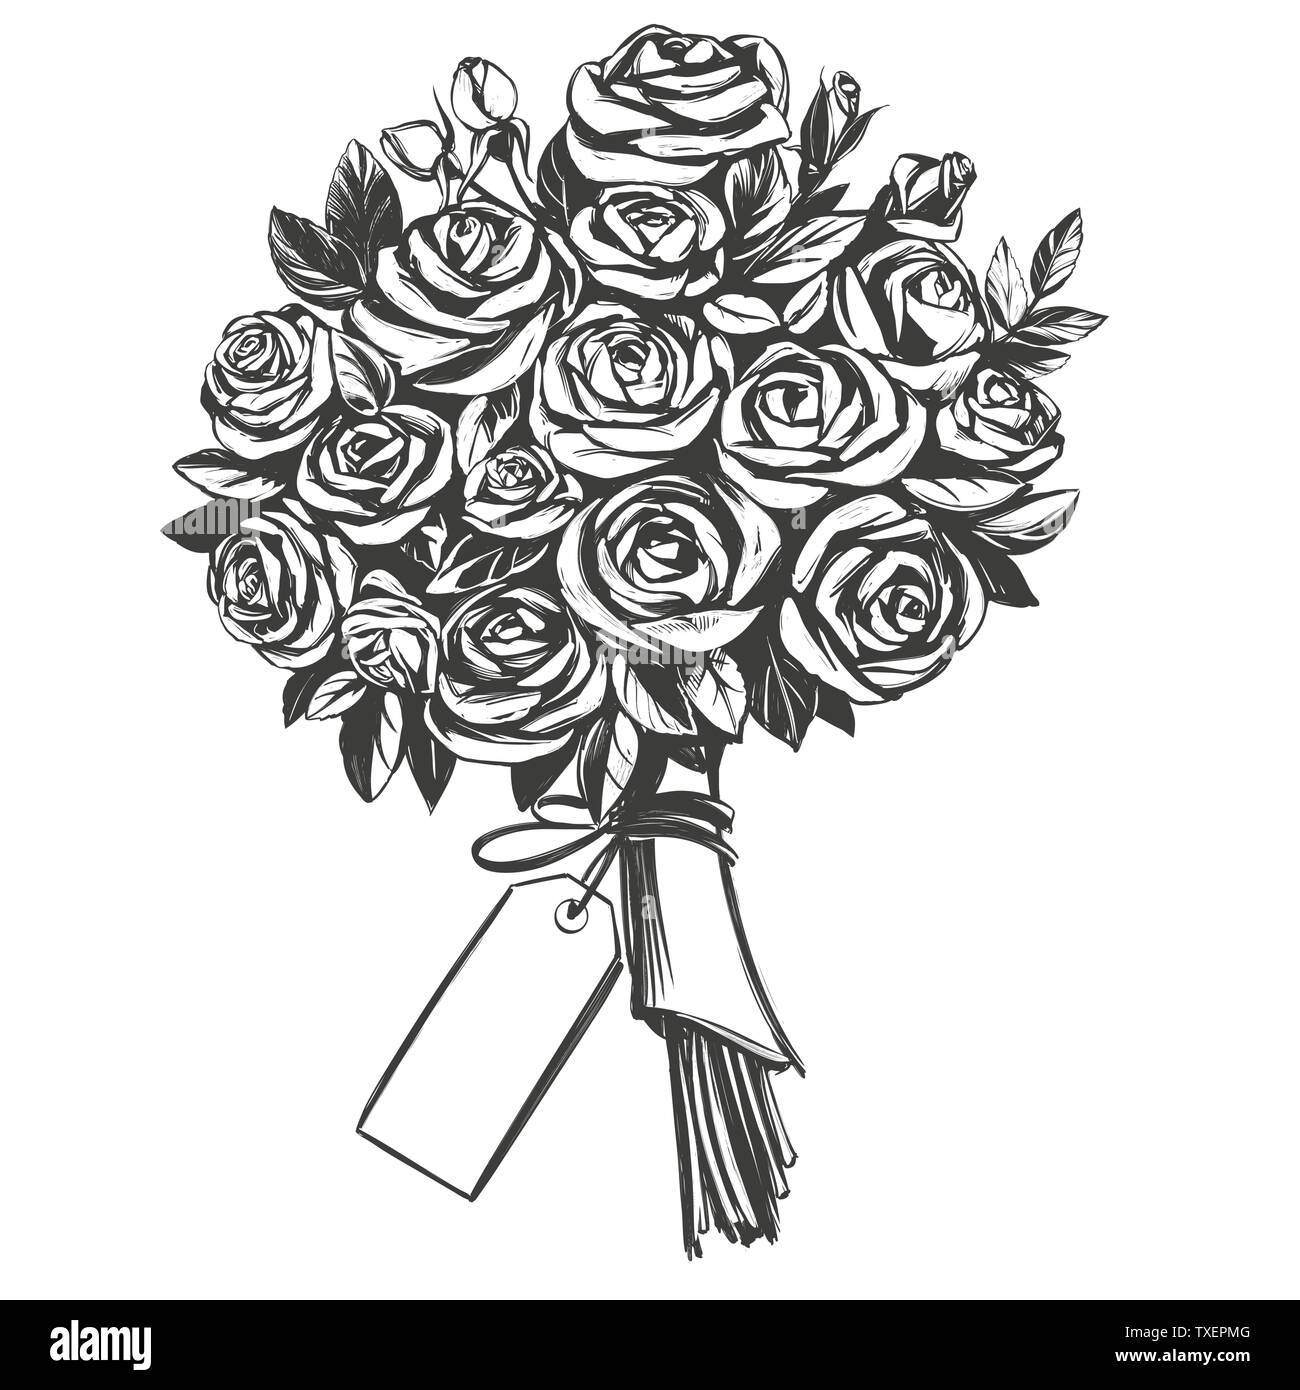 Bouquet Of Roses Greeting Card Hand Drawn Vector Illustration